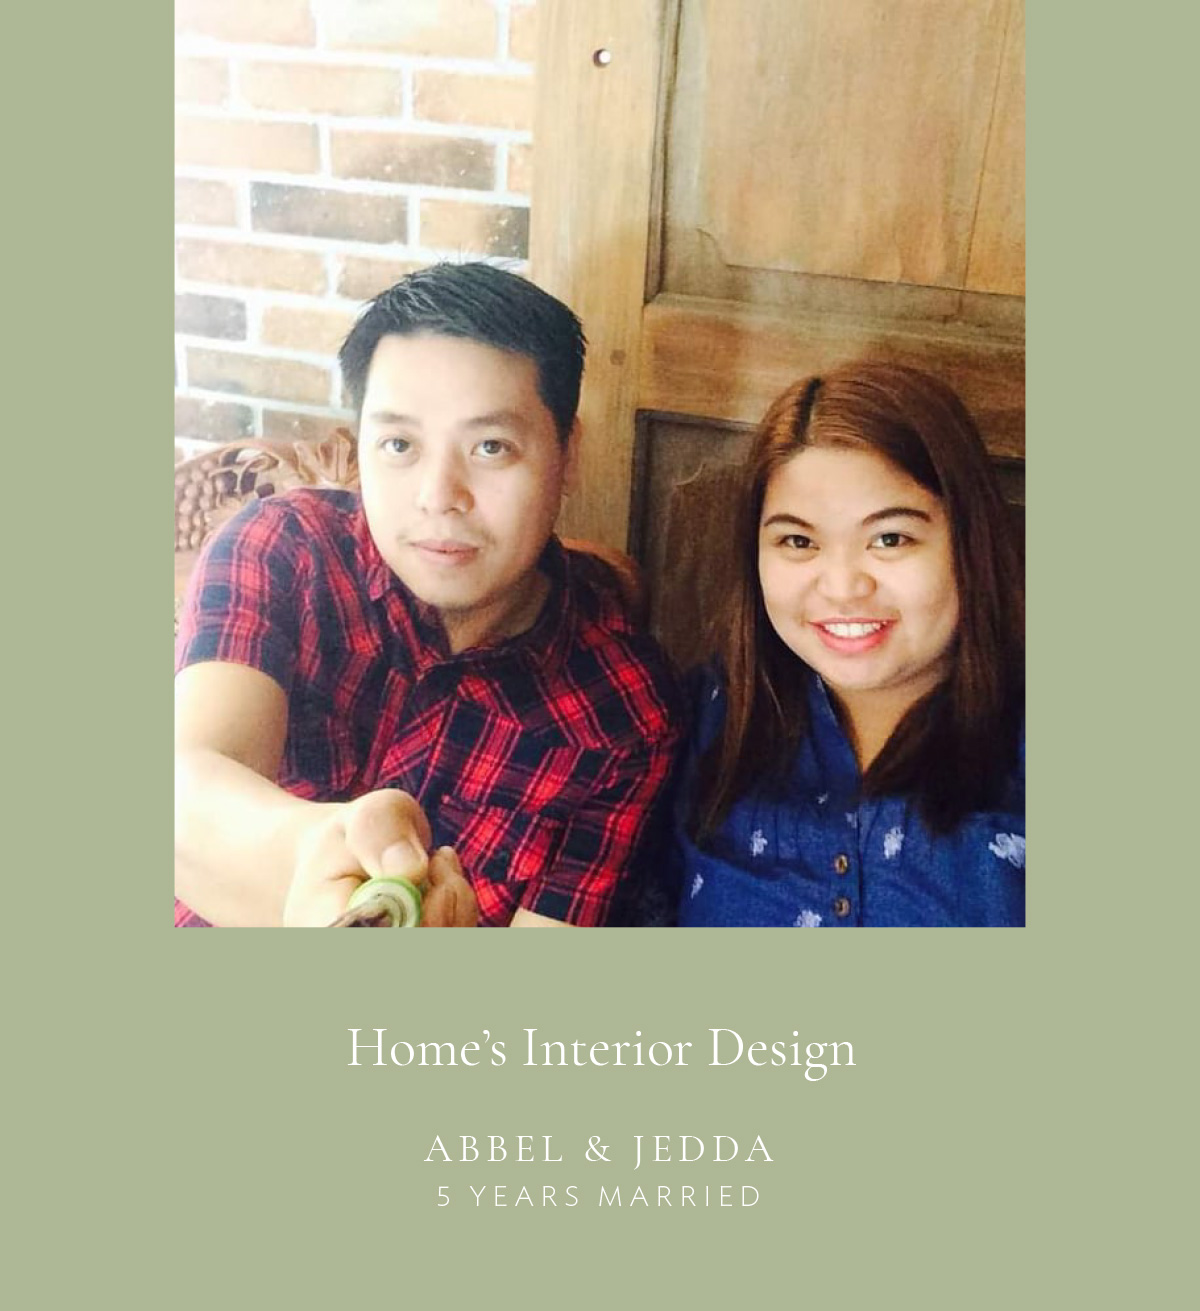 (Layout with photo) Home’s Interior Design - Abel and Jeddah, 5 years married